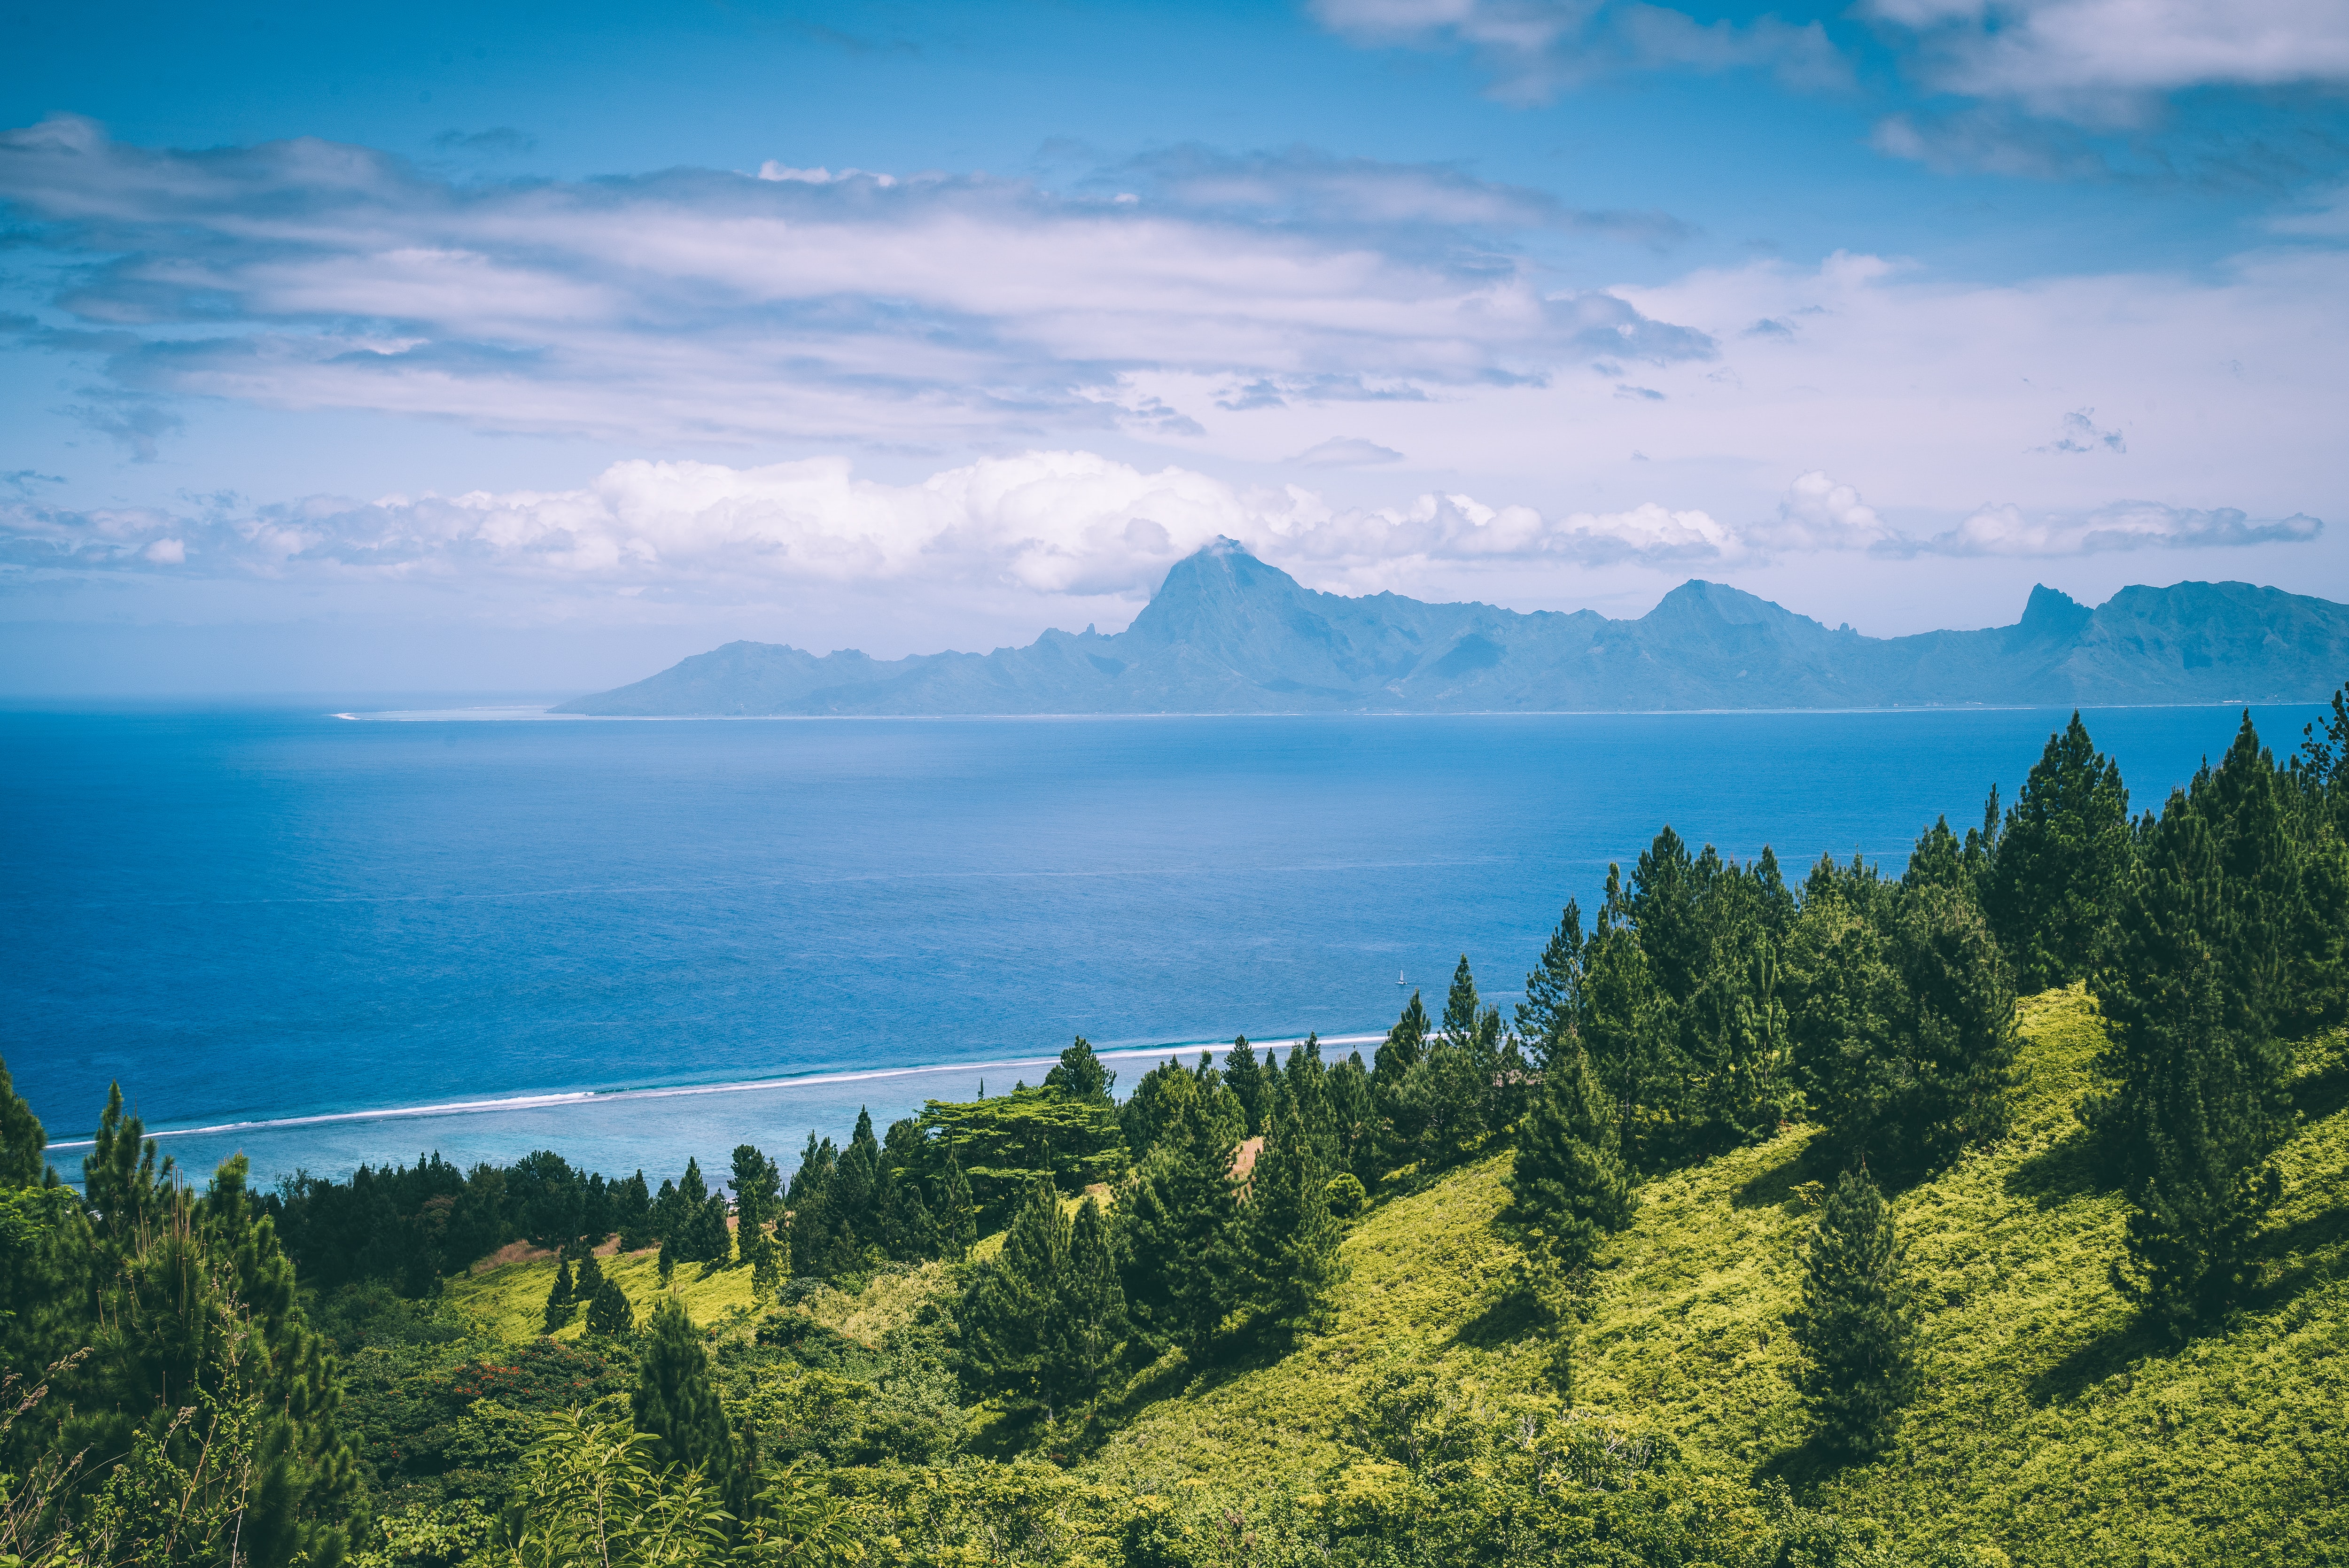 trees along coastline with island in the background in French Polynesia